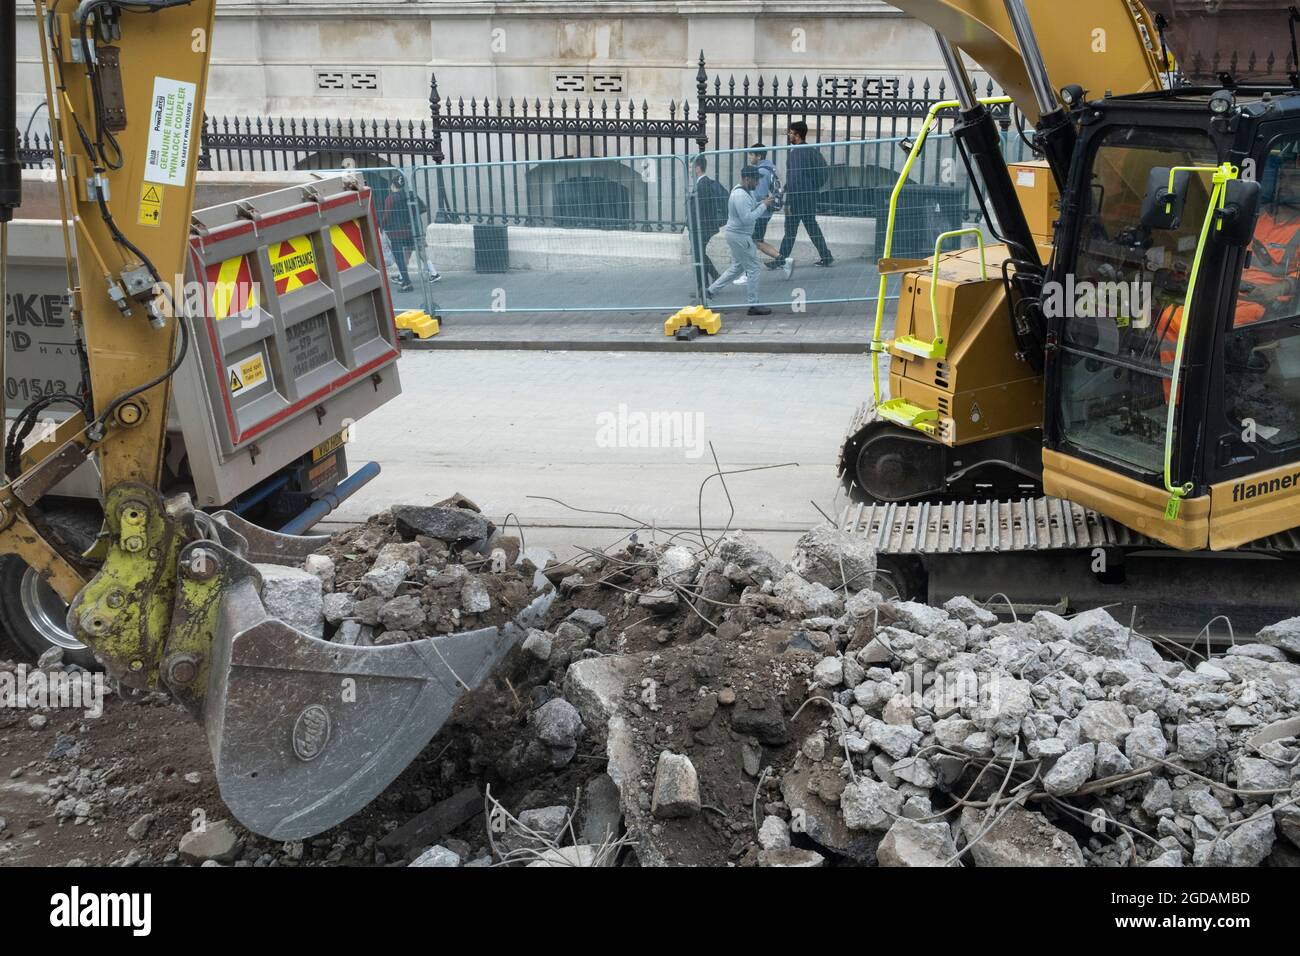 Workman operating a digger lifts large quantities of rubble into a truck at the construction site for work on the update to the Midland Metro tram public transport system in the city centre along Corporation Street on 3rd August 2021 in Birmingham, United Kingdom. The original tracks are being pulled up and relaid, while a new line is also under construction and due to open later in the year. The Midland Metro is a light-rail tram line in the county of West Midlands, England, operating between the cities of Birmingham and Wolverhampton via the towns of West Bromwich and Wednesbury. The line op Stock Photo